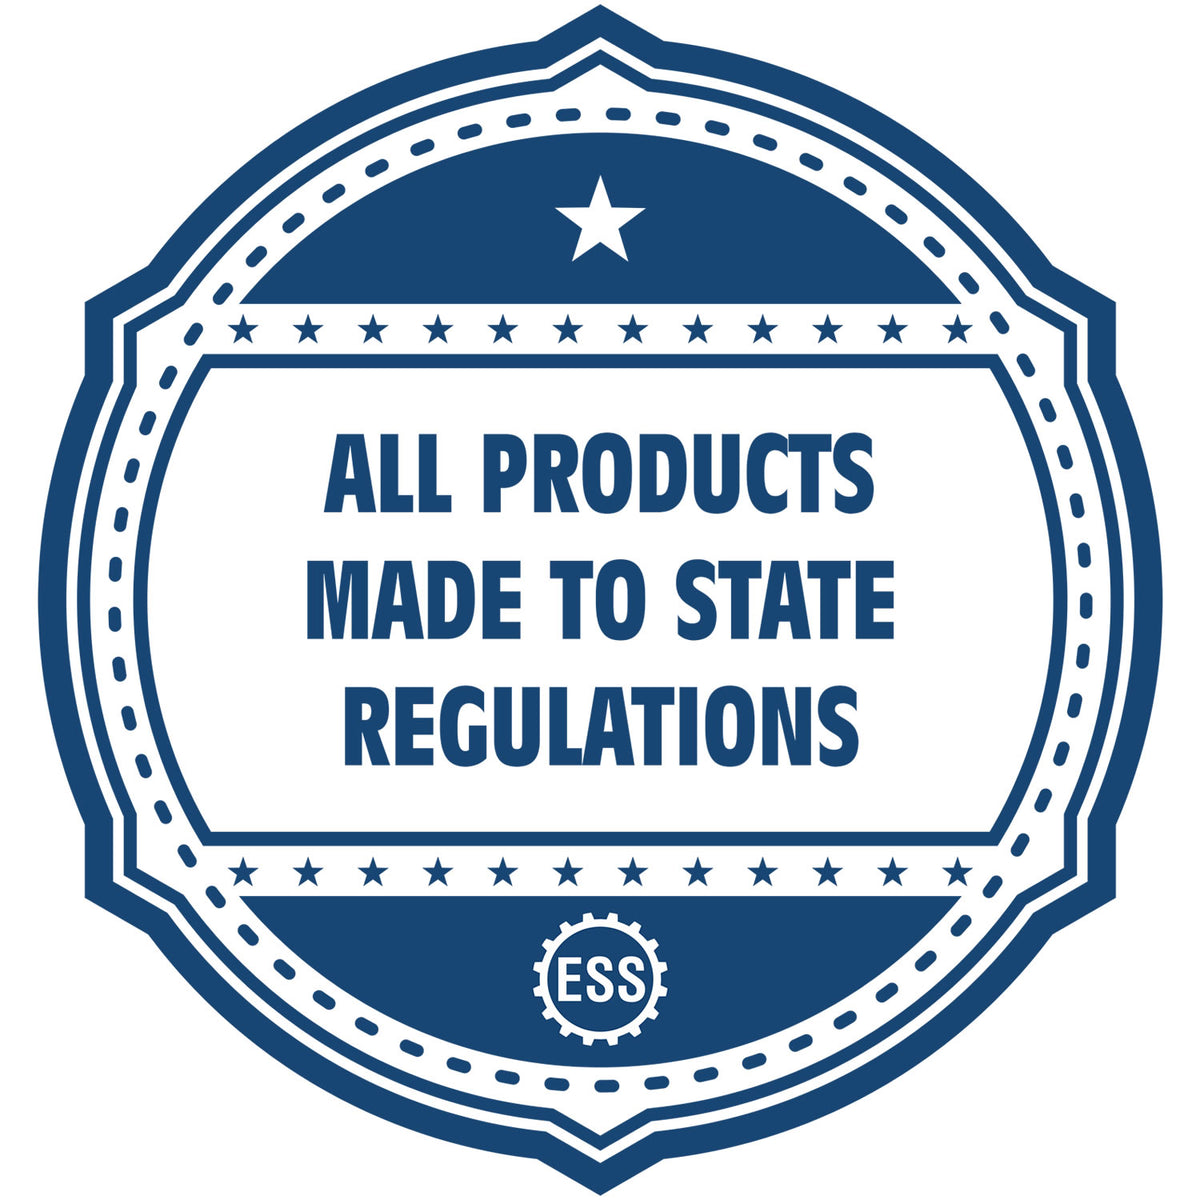 An icon or badge element for the Slim Pre-Inked Oklahoma Land Surveyor Seal Stamp showing that this product is made in compliance with state regulations.